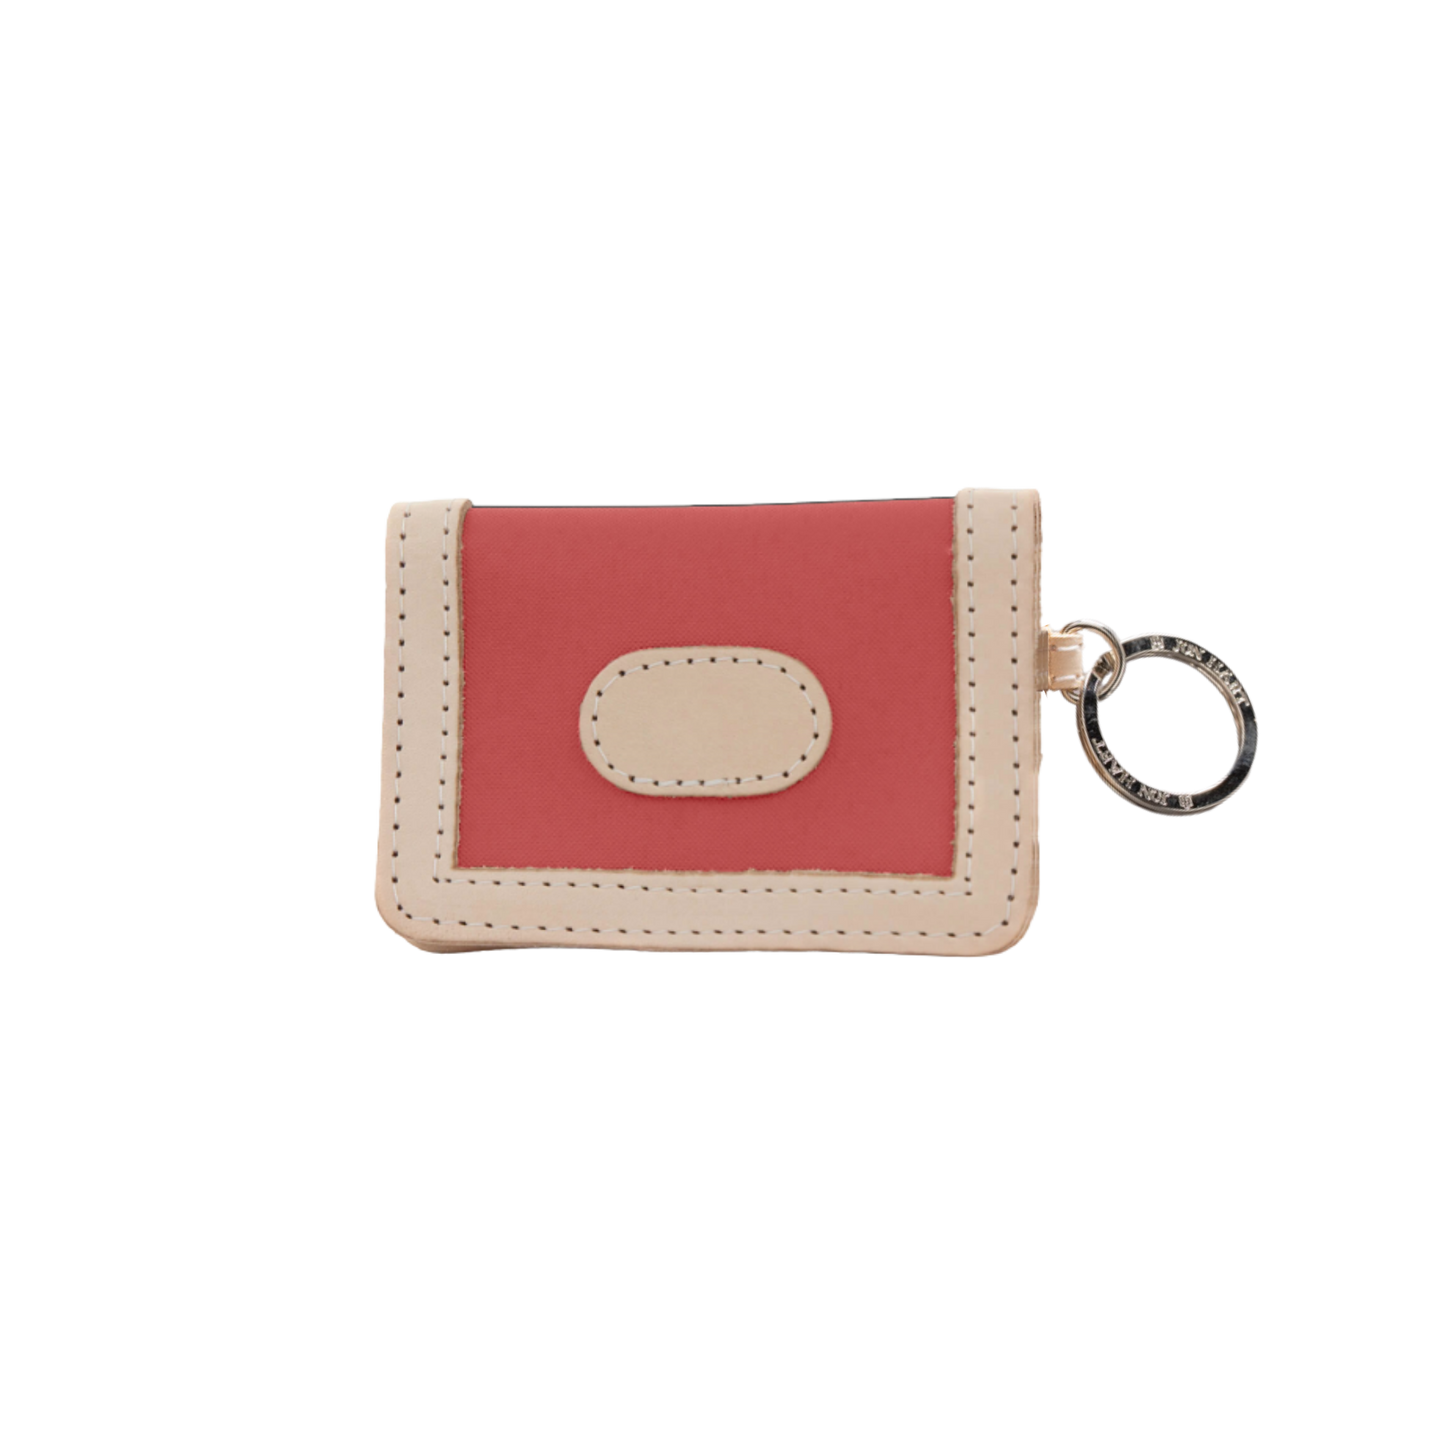 ID Wallet - Coral Coated Canvas Front Angle in Color 'Coral Coated Canvas'